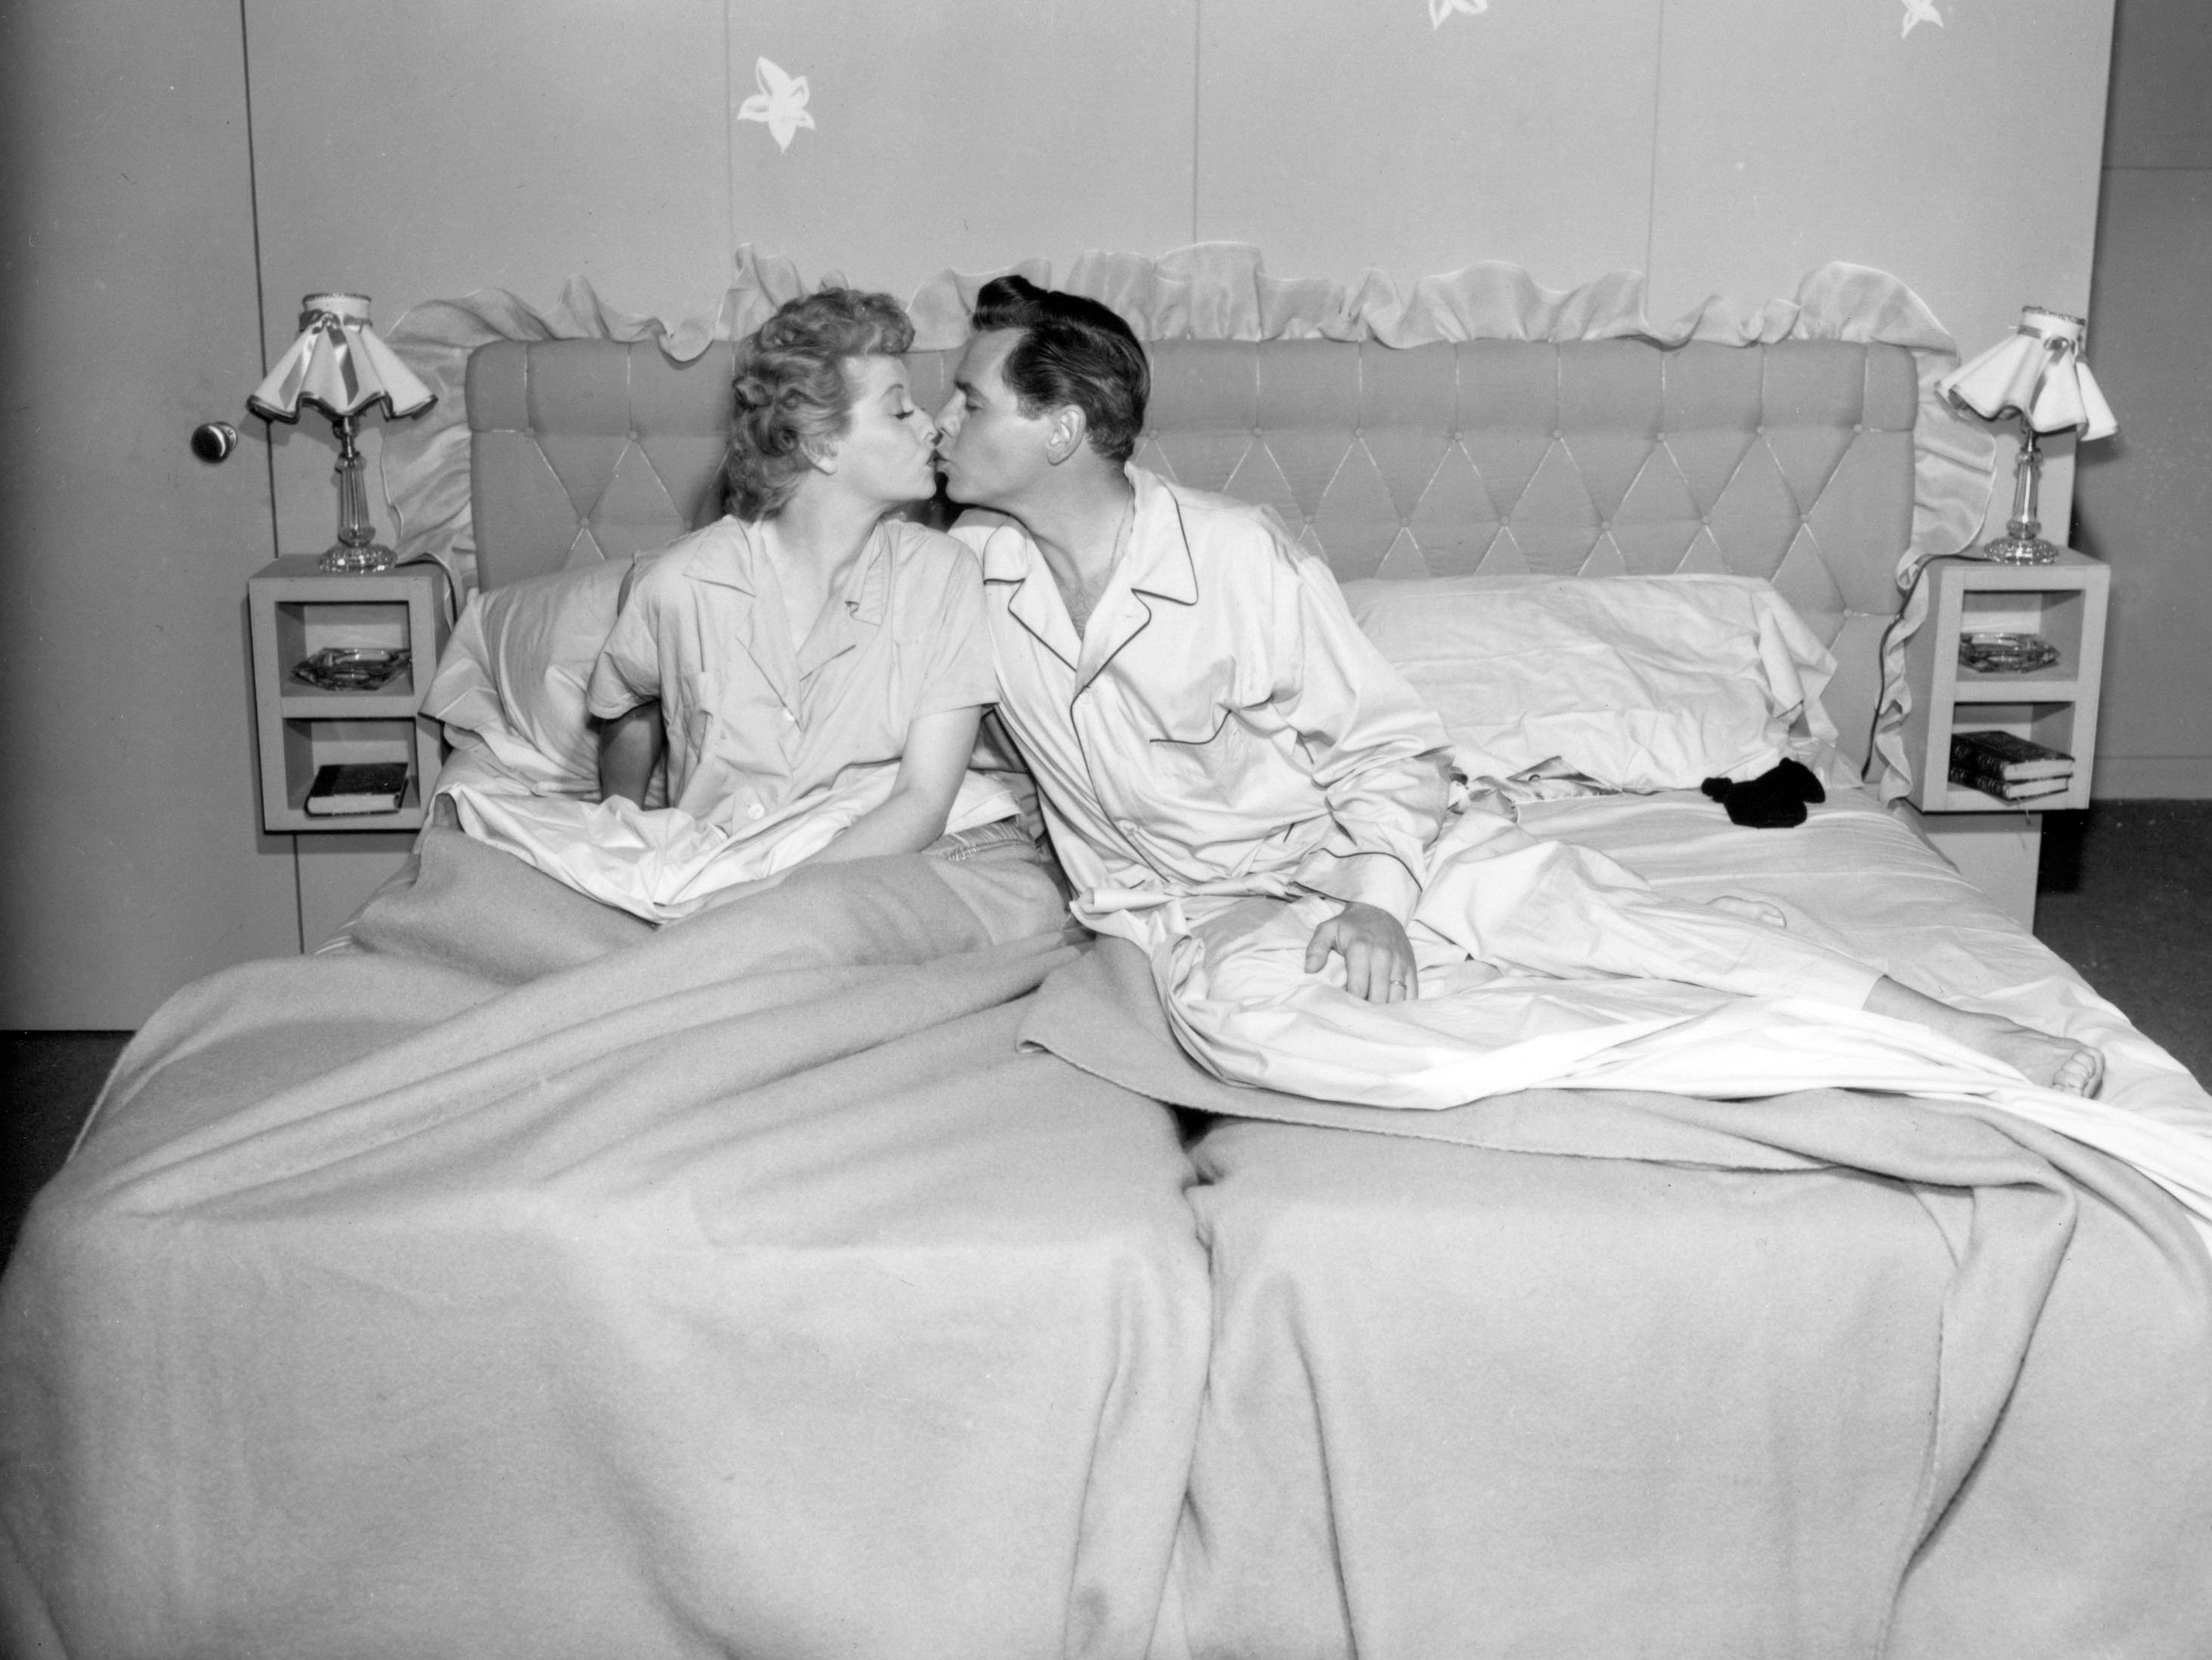 Lucille Ball and Desi Arnaz | CBS via Getty Images